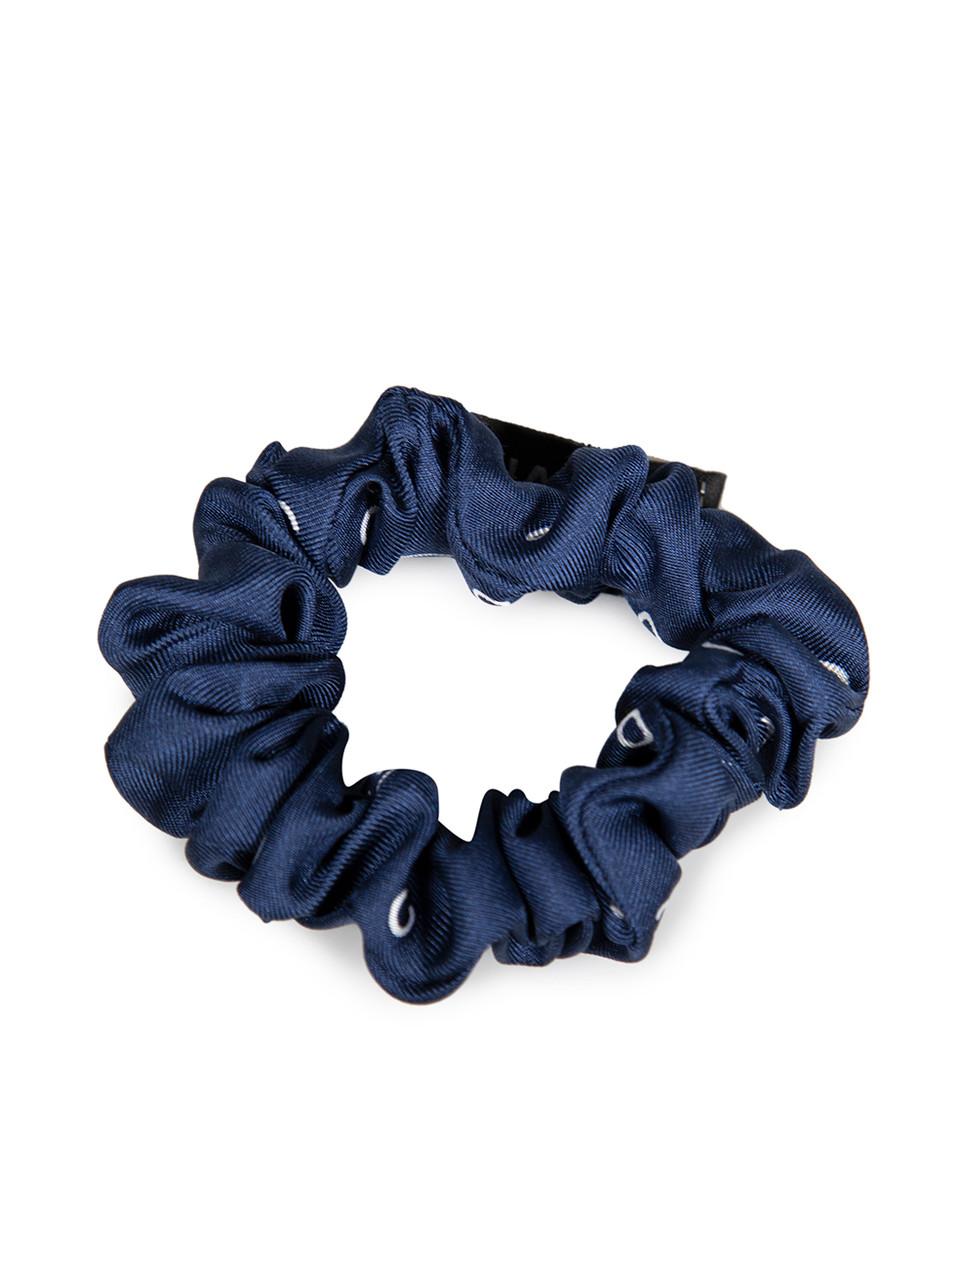 CONDITION is Very good. Hardly any visible wear to scrunchie and scarf is evident on this used Chanel designer resale item. This item comes with original box.
 
 Details
 Blue
 Silk
 Elasticated scrunchie
 Square scarf
 CC logo pattern
 
 
 Made in